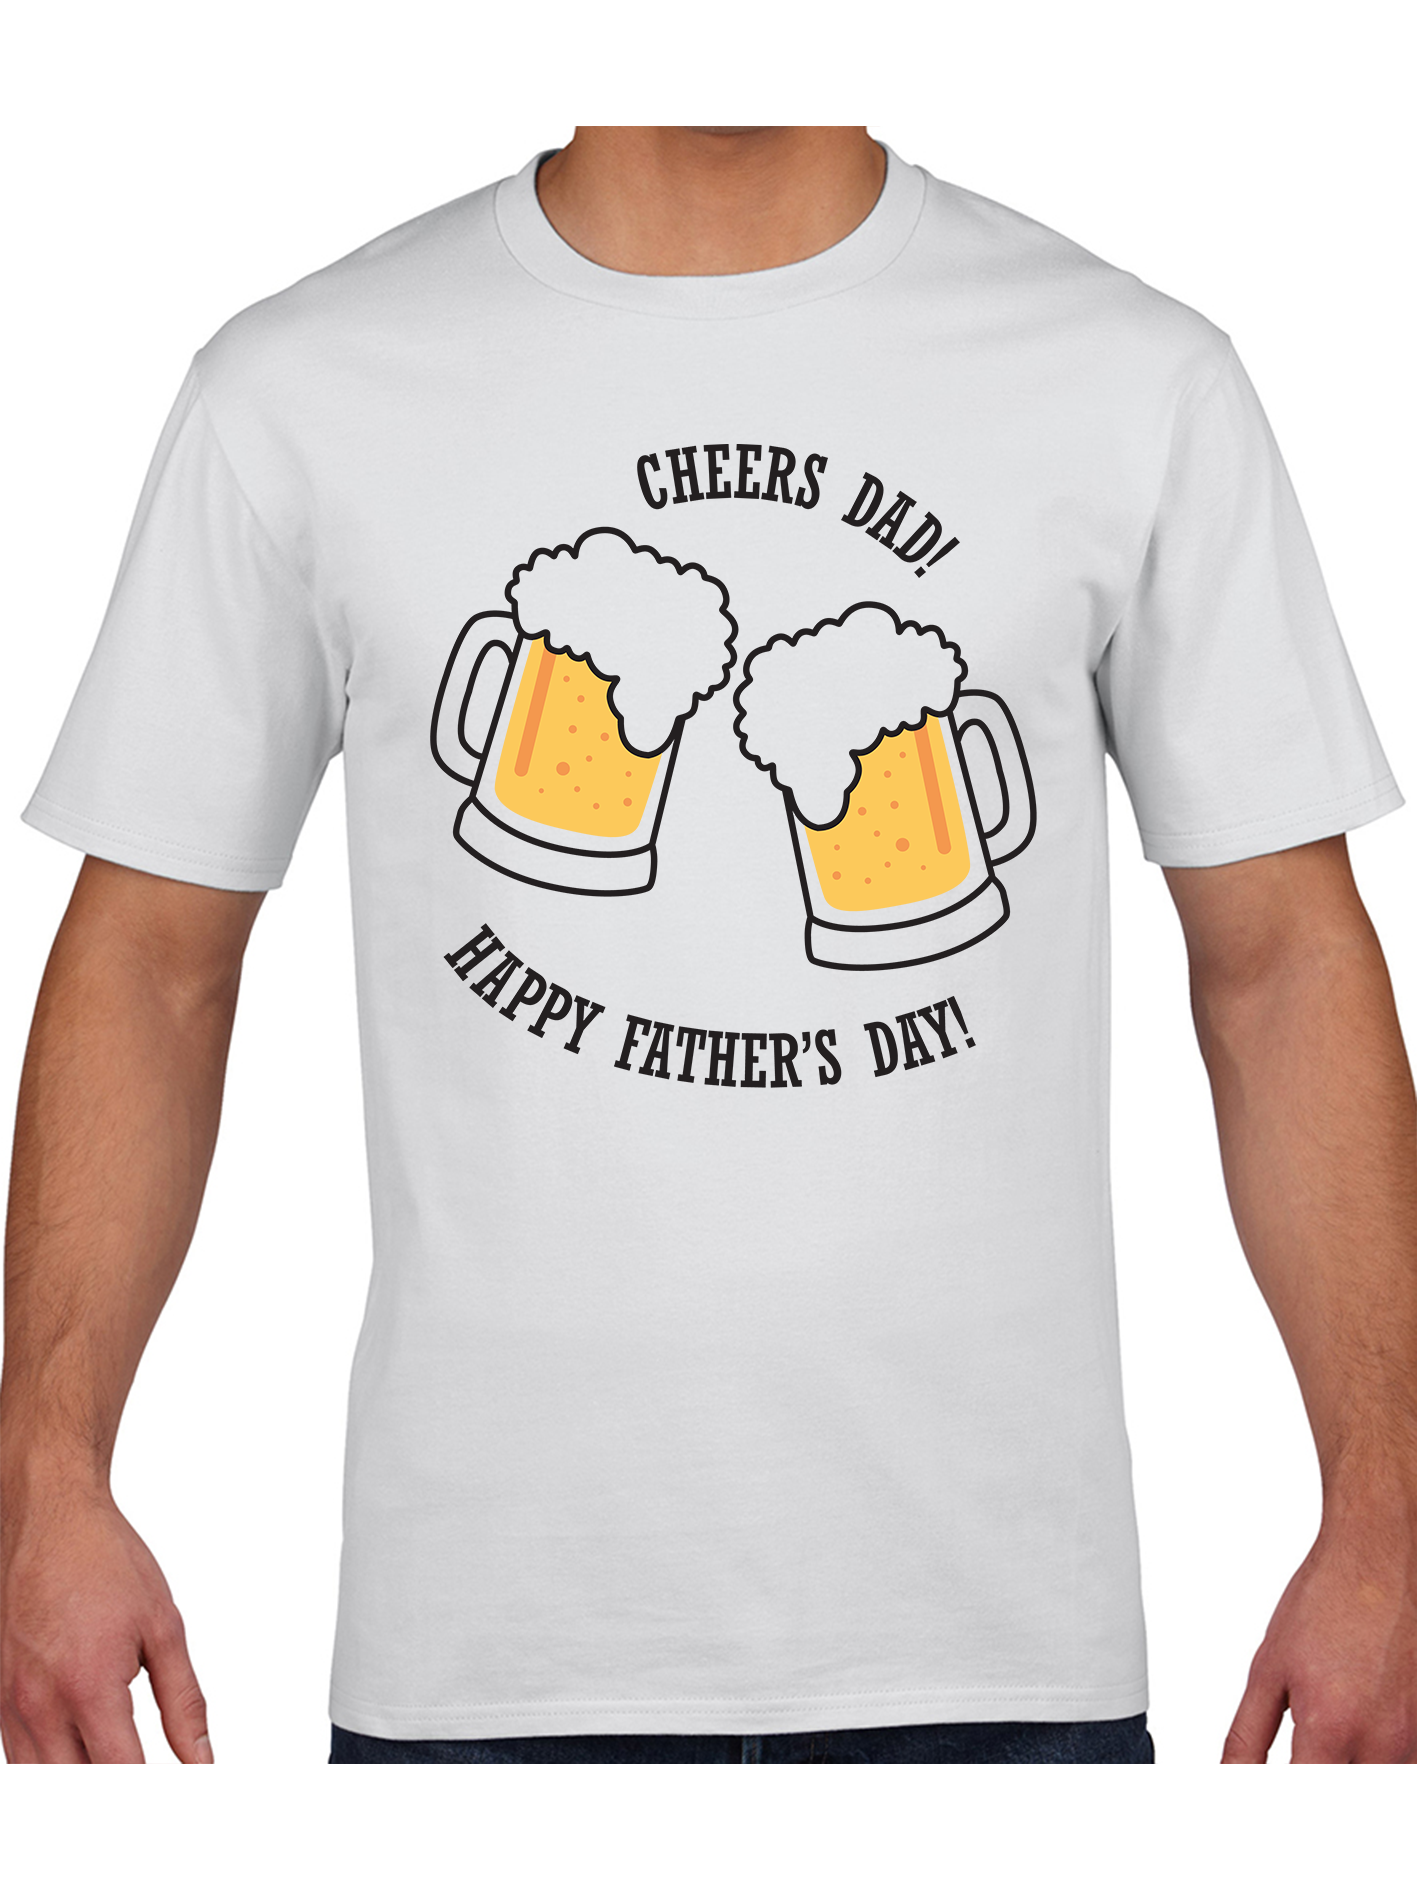 Beer Dad T-shirt | Father's Day T-shirt | White